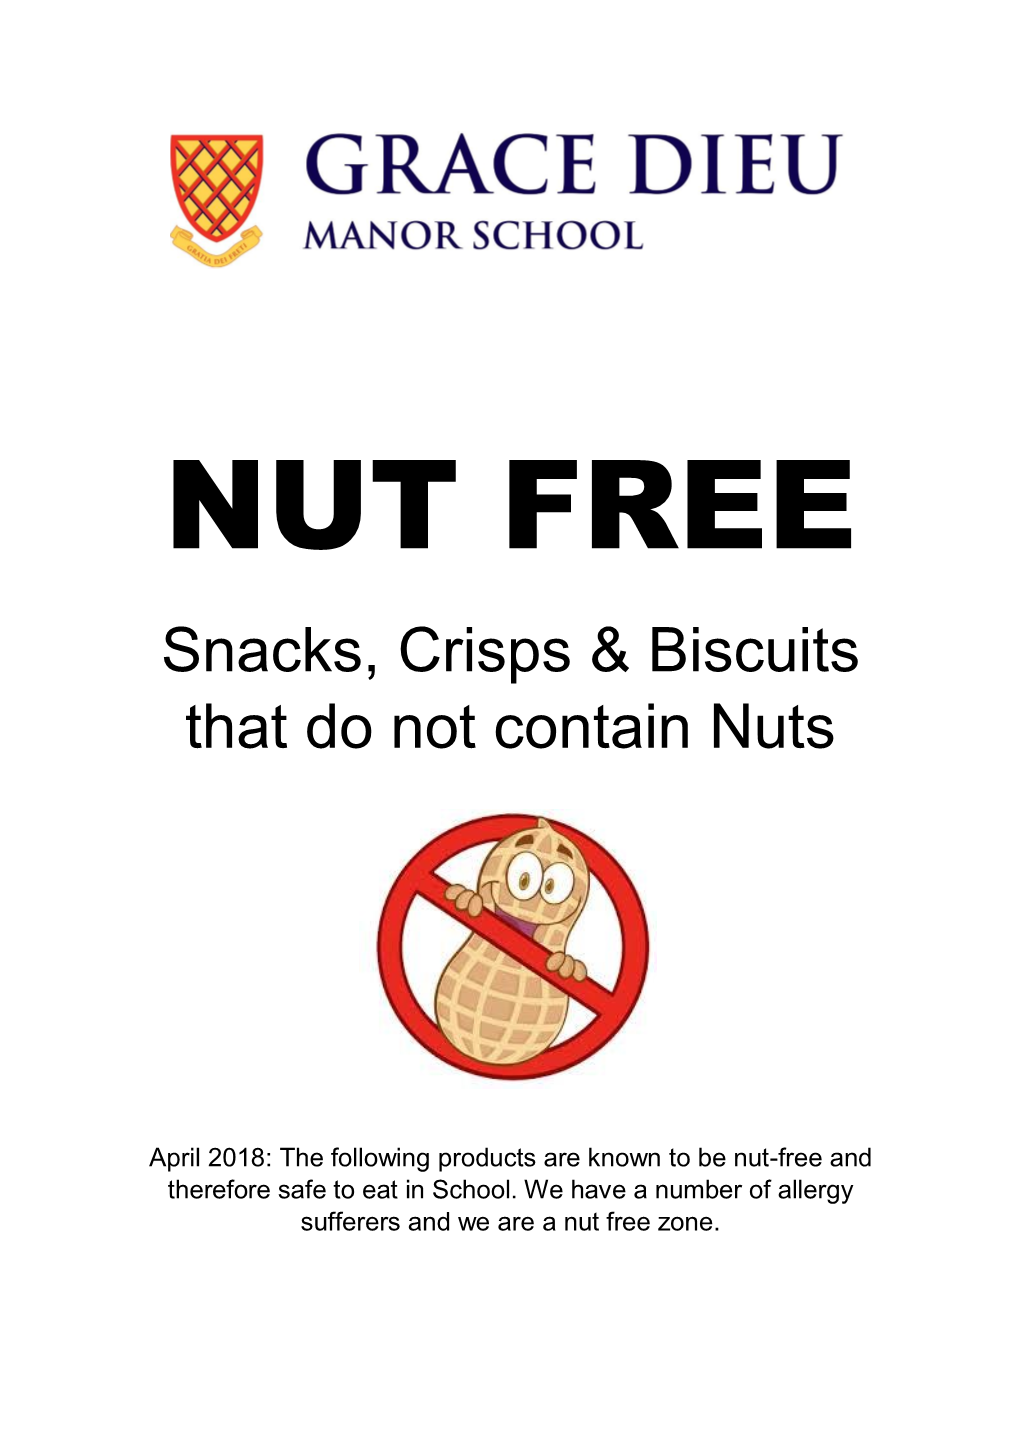 Snacks, Crisps & Biscuits That Do Not Contain Nuts